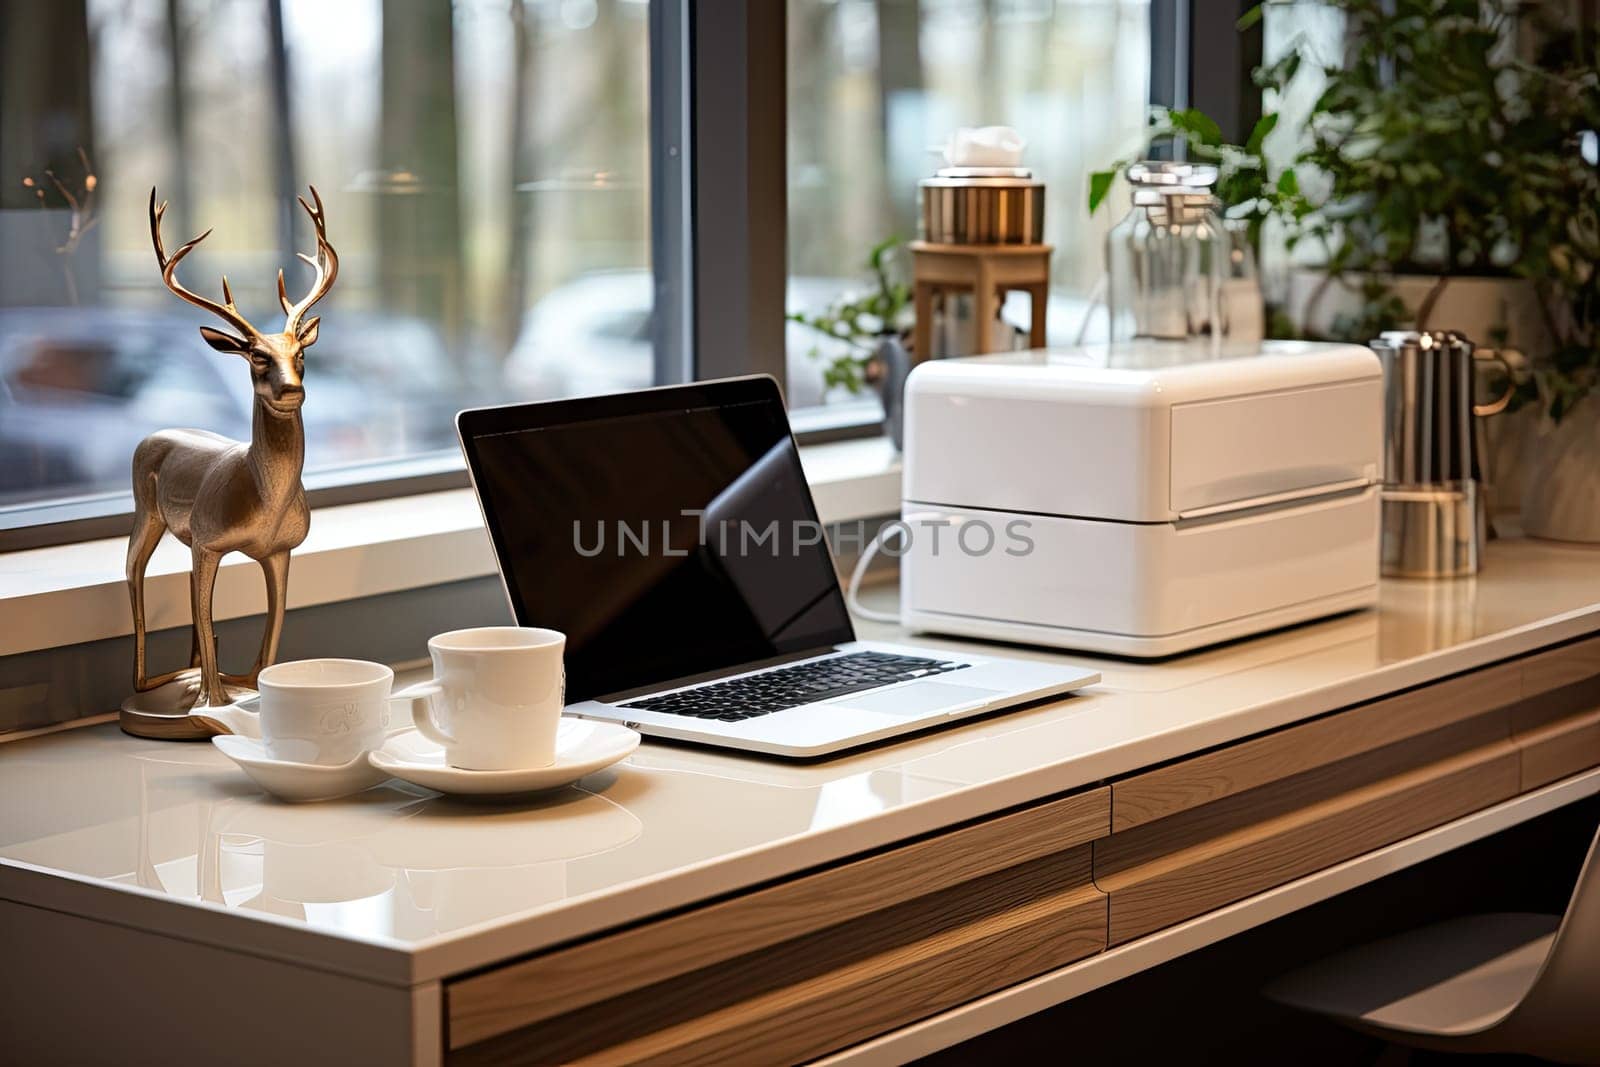 an office desk with a laptop, coffee cup and deer figurie on the table next to the window